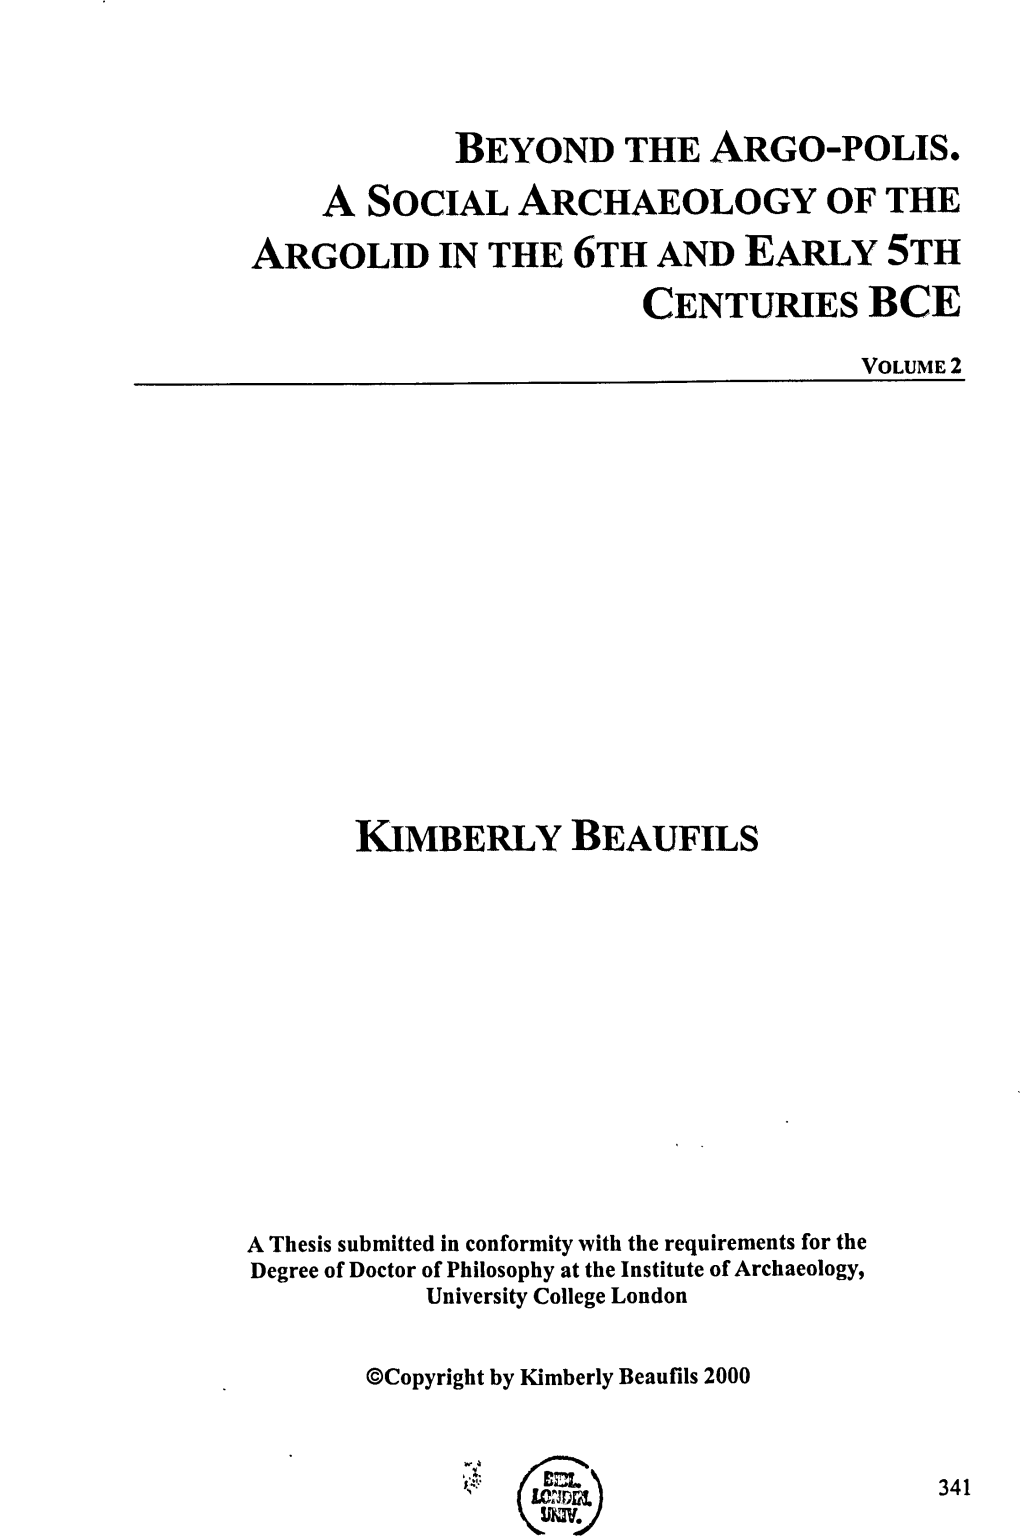 A Thesis Submitted in Conformity with the Requirements for the Degree of Doctor of Philosophy at the Institute of Archaeology, University College London